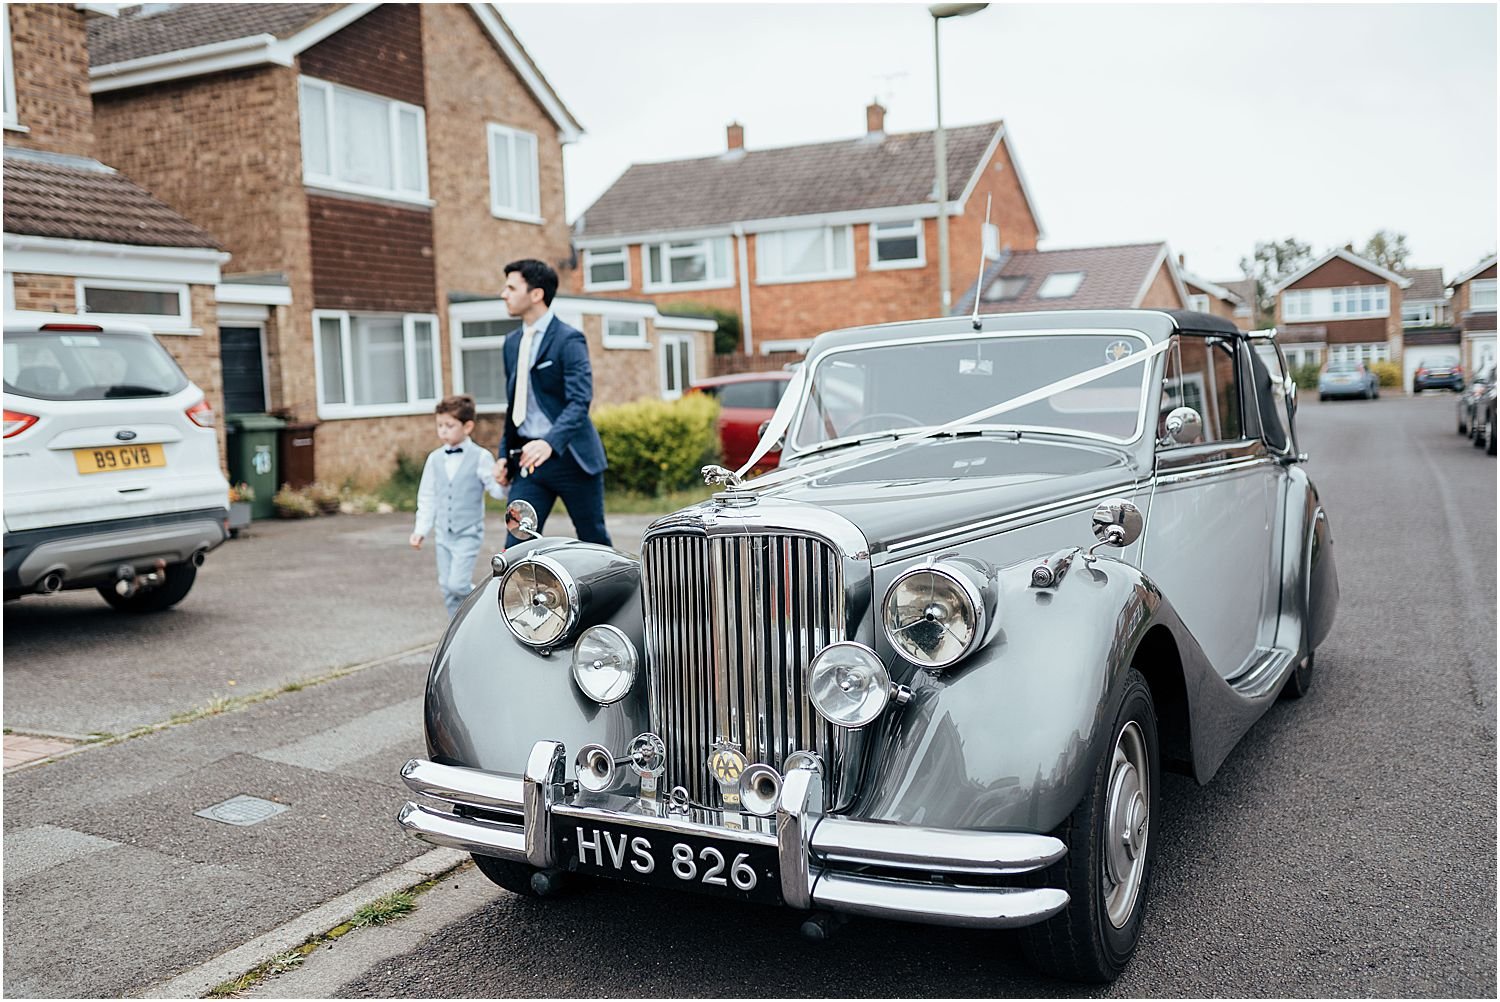 Wedding car arriving at bride's house in Oxford